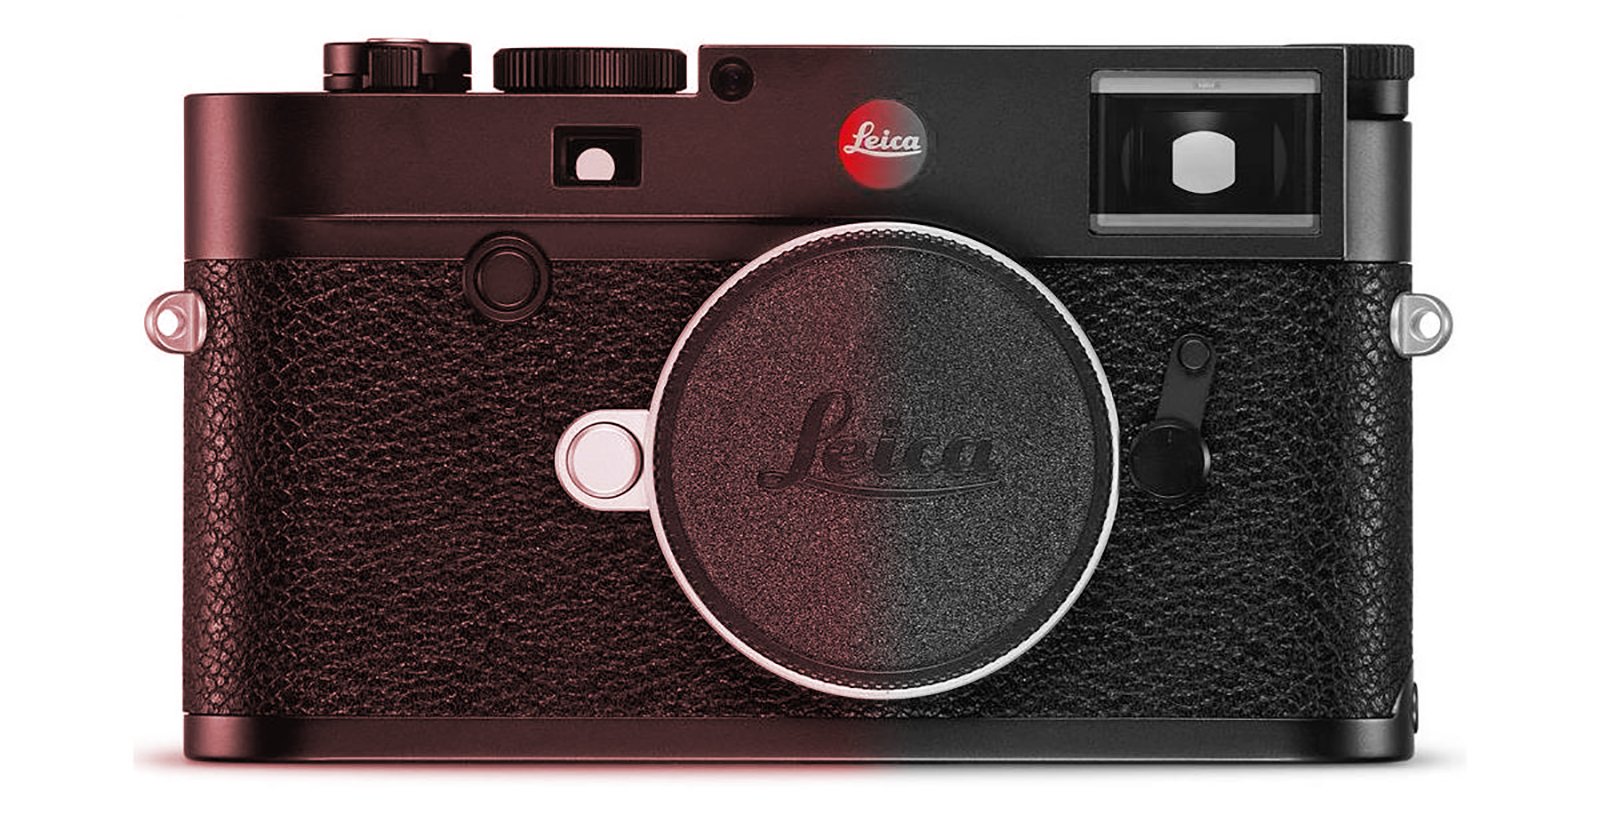 Leica is Working On a New Monochrom Camera with a 41MP Sensor: Report